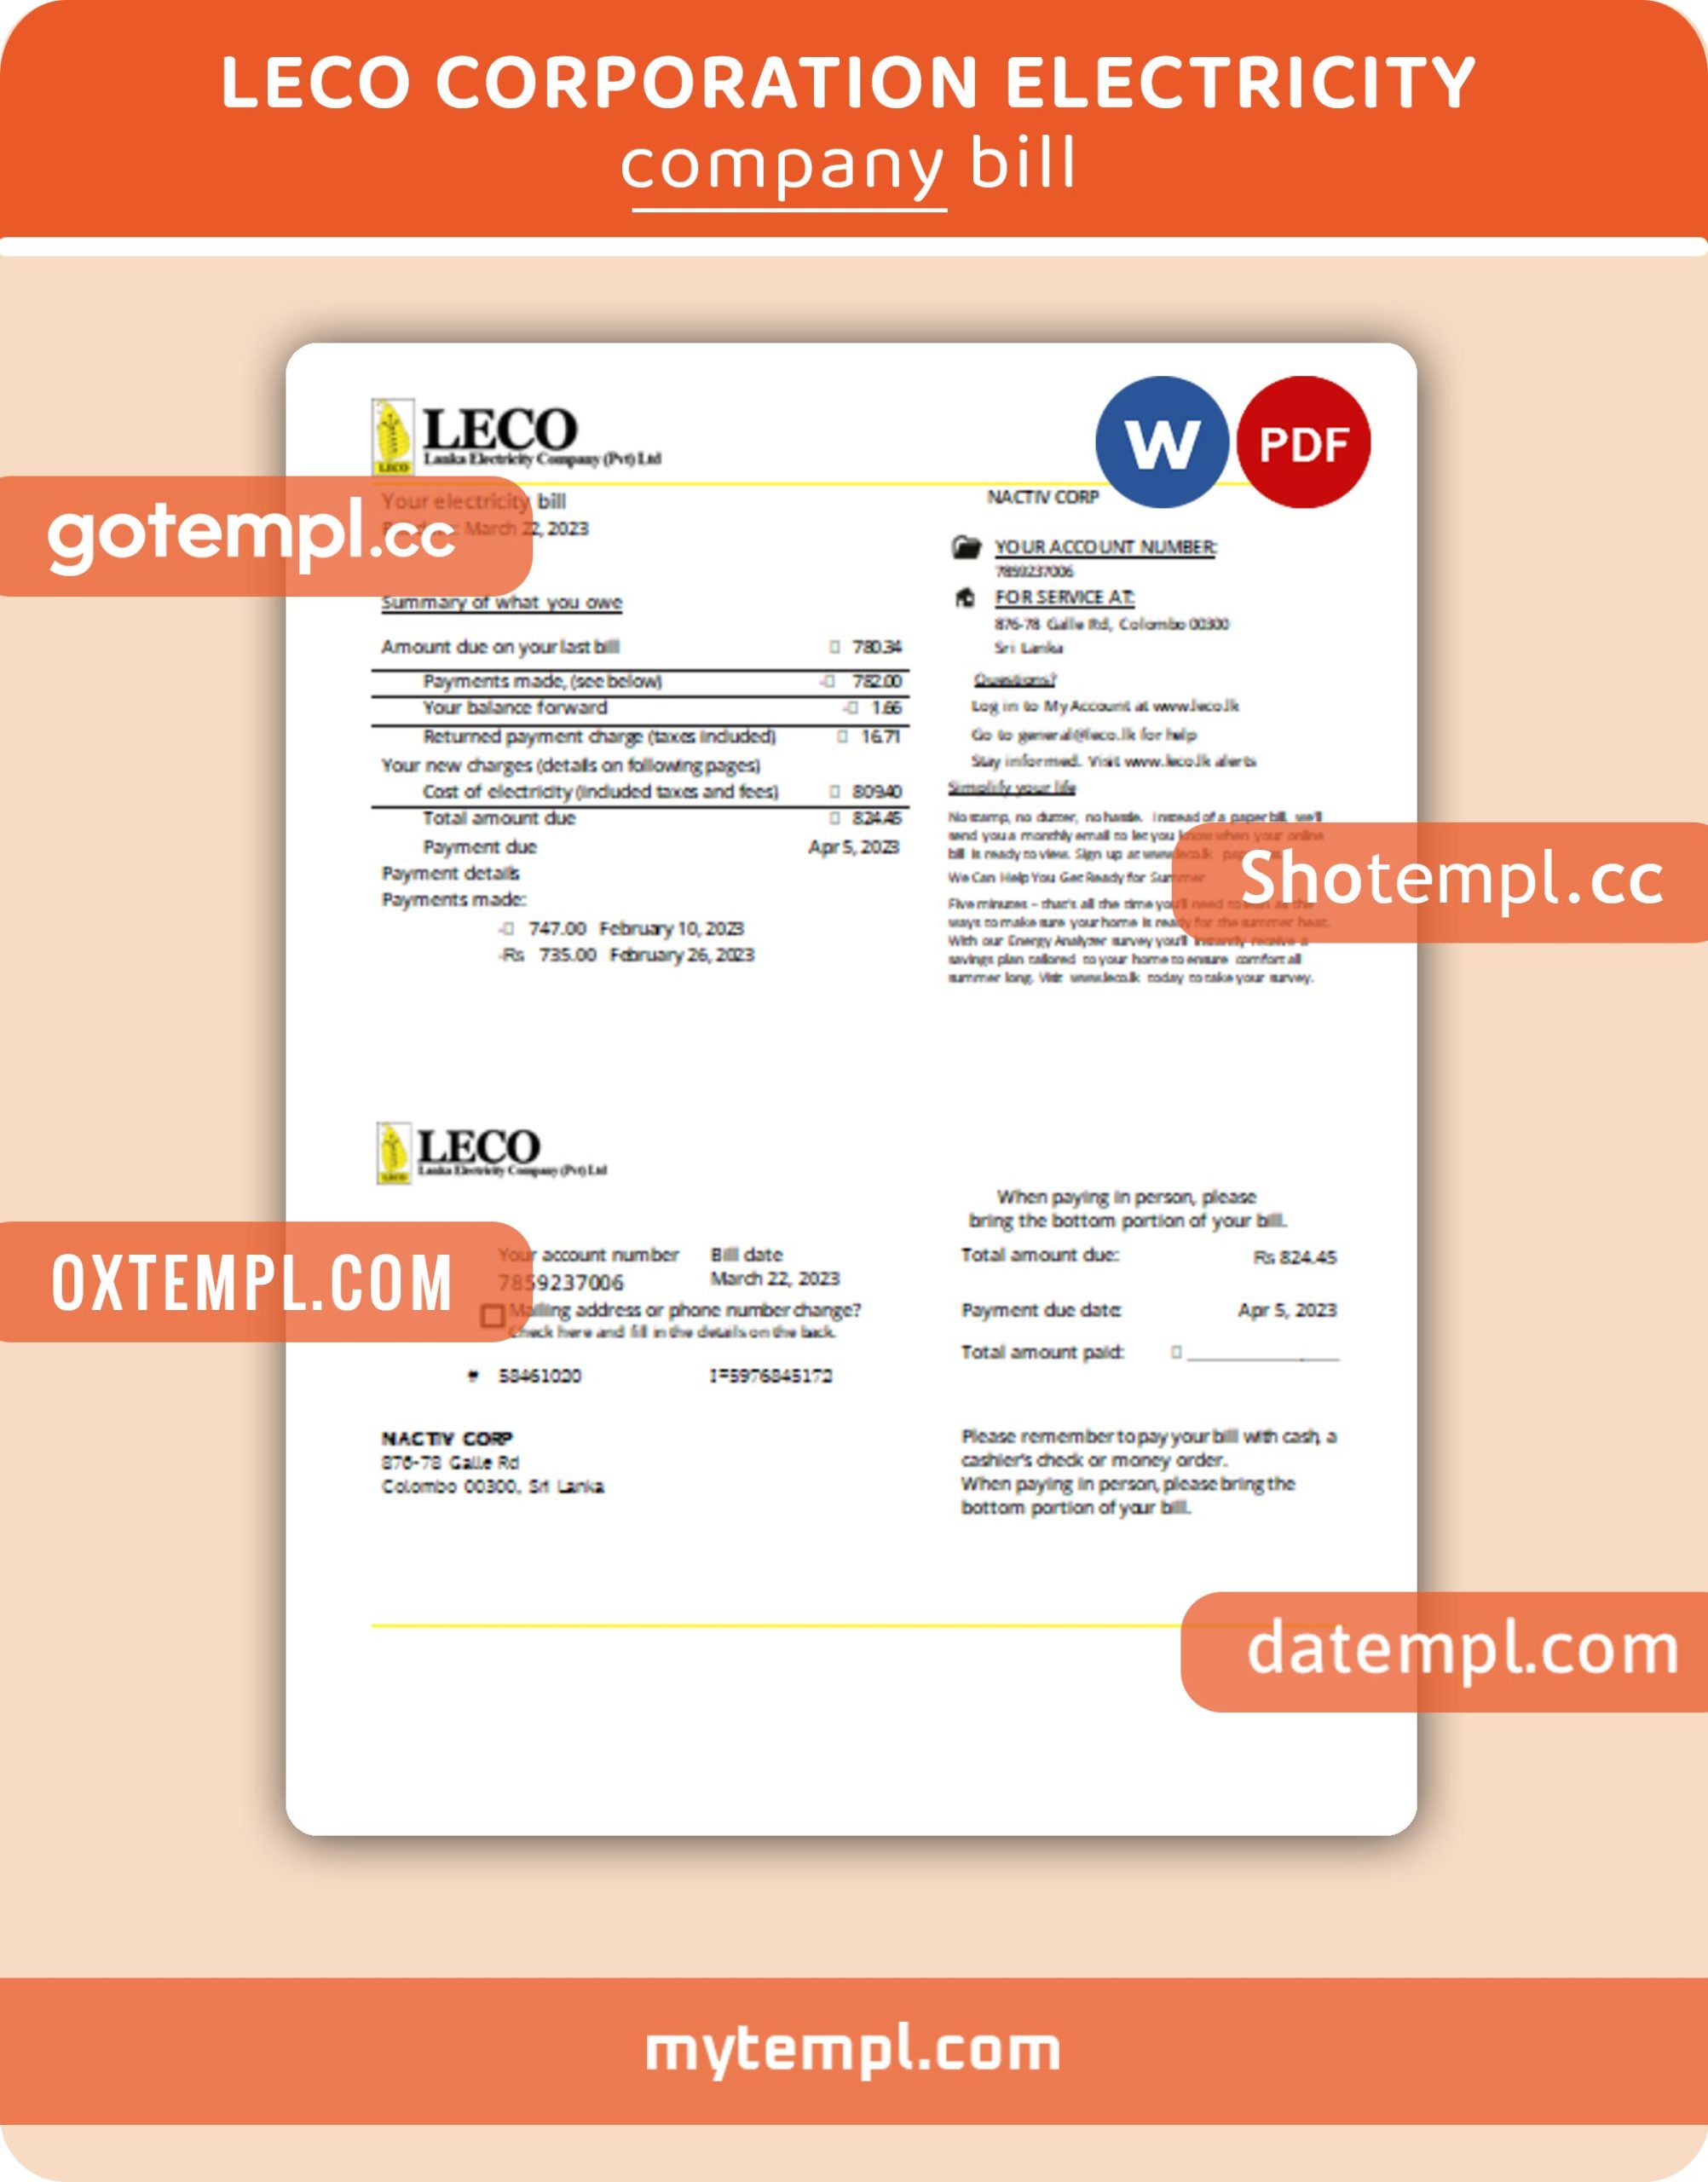 LECO Corporation electricity business utility bill, PDF and WORD template